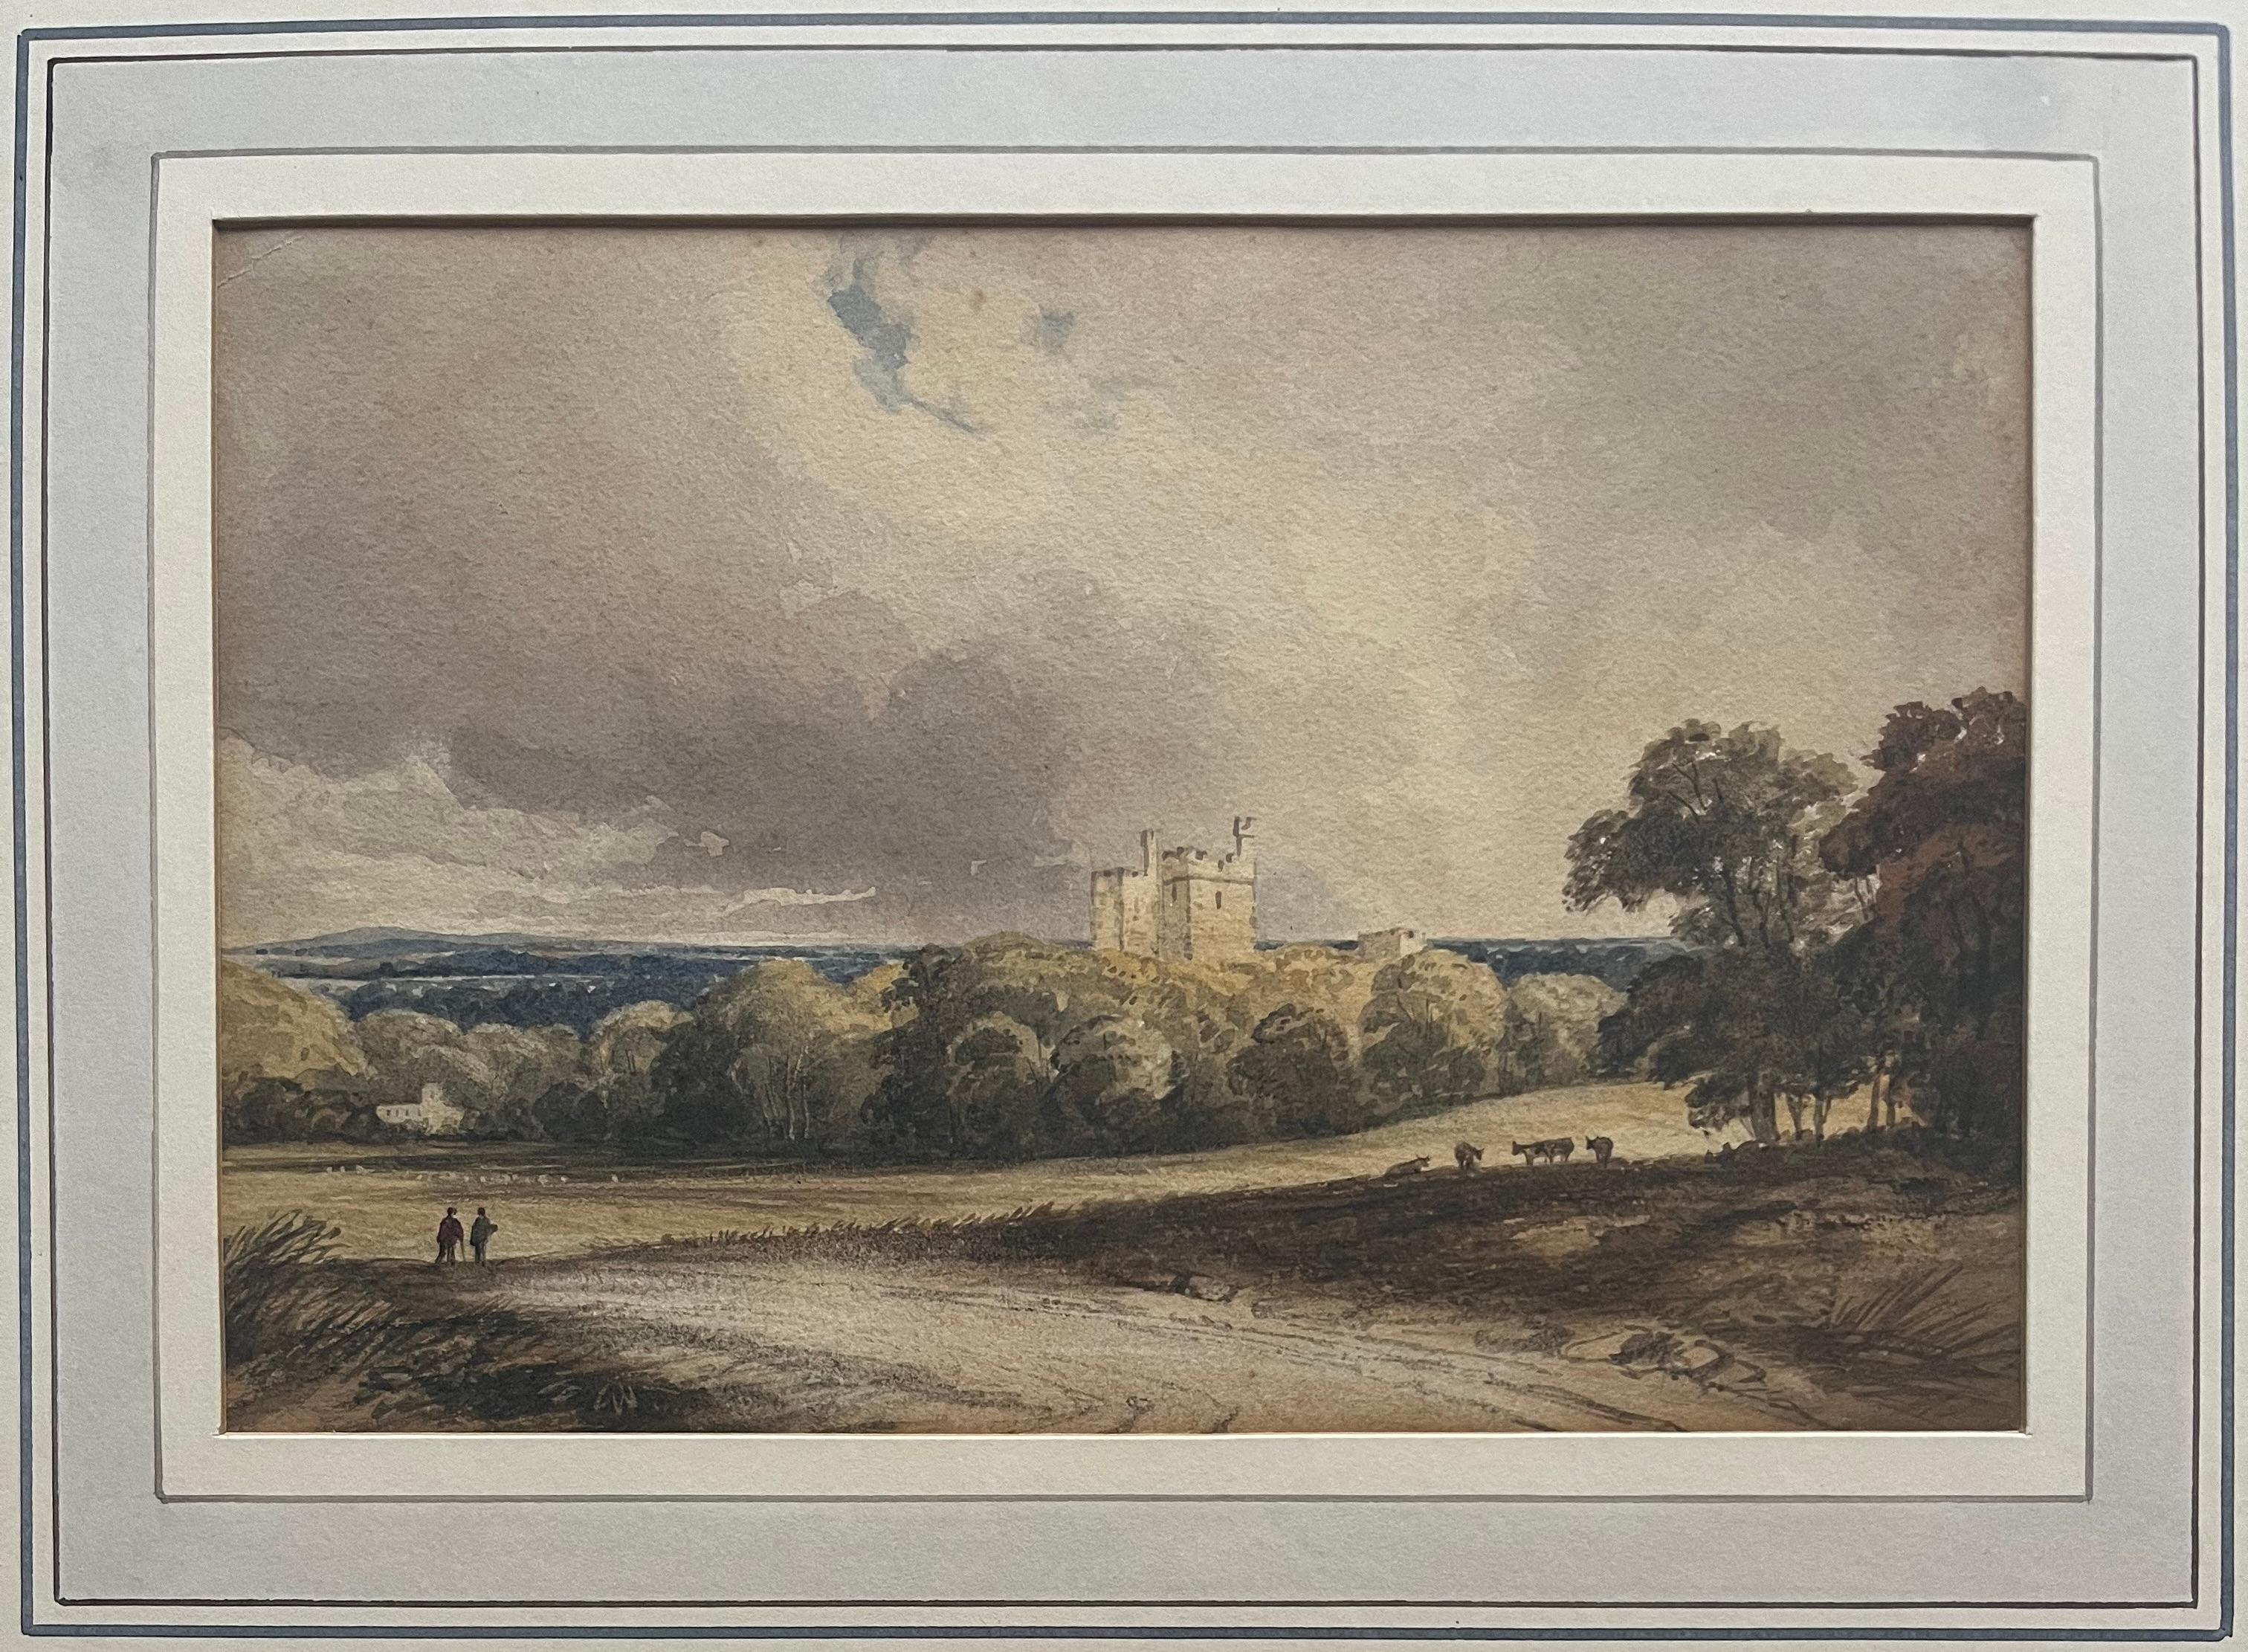 English School watercolour, Figures on a country track with a castle beyond - Art by William Leighton Leitch